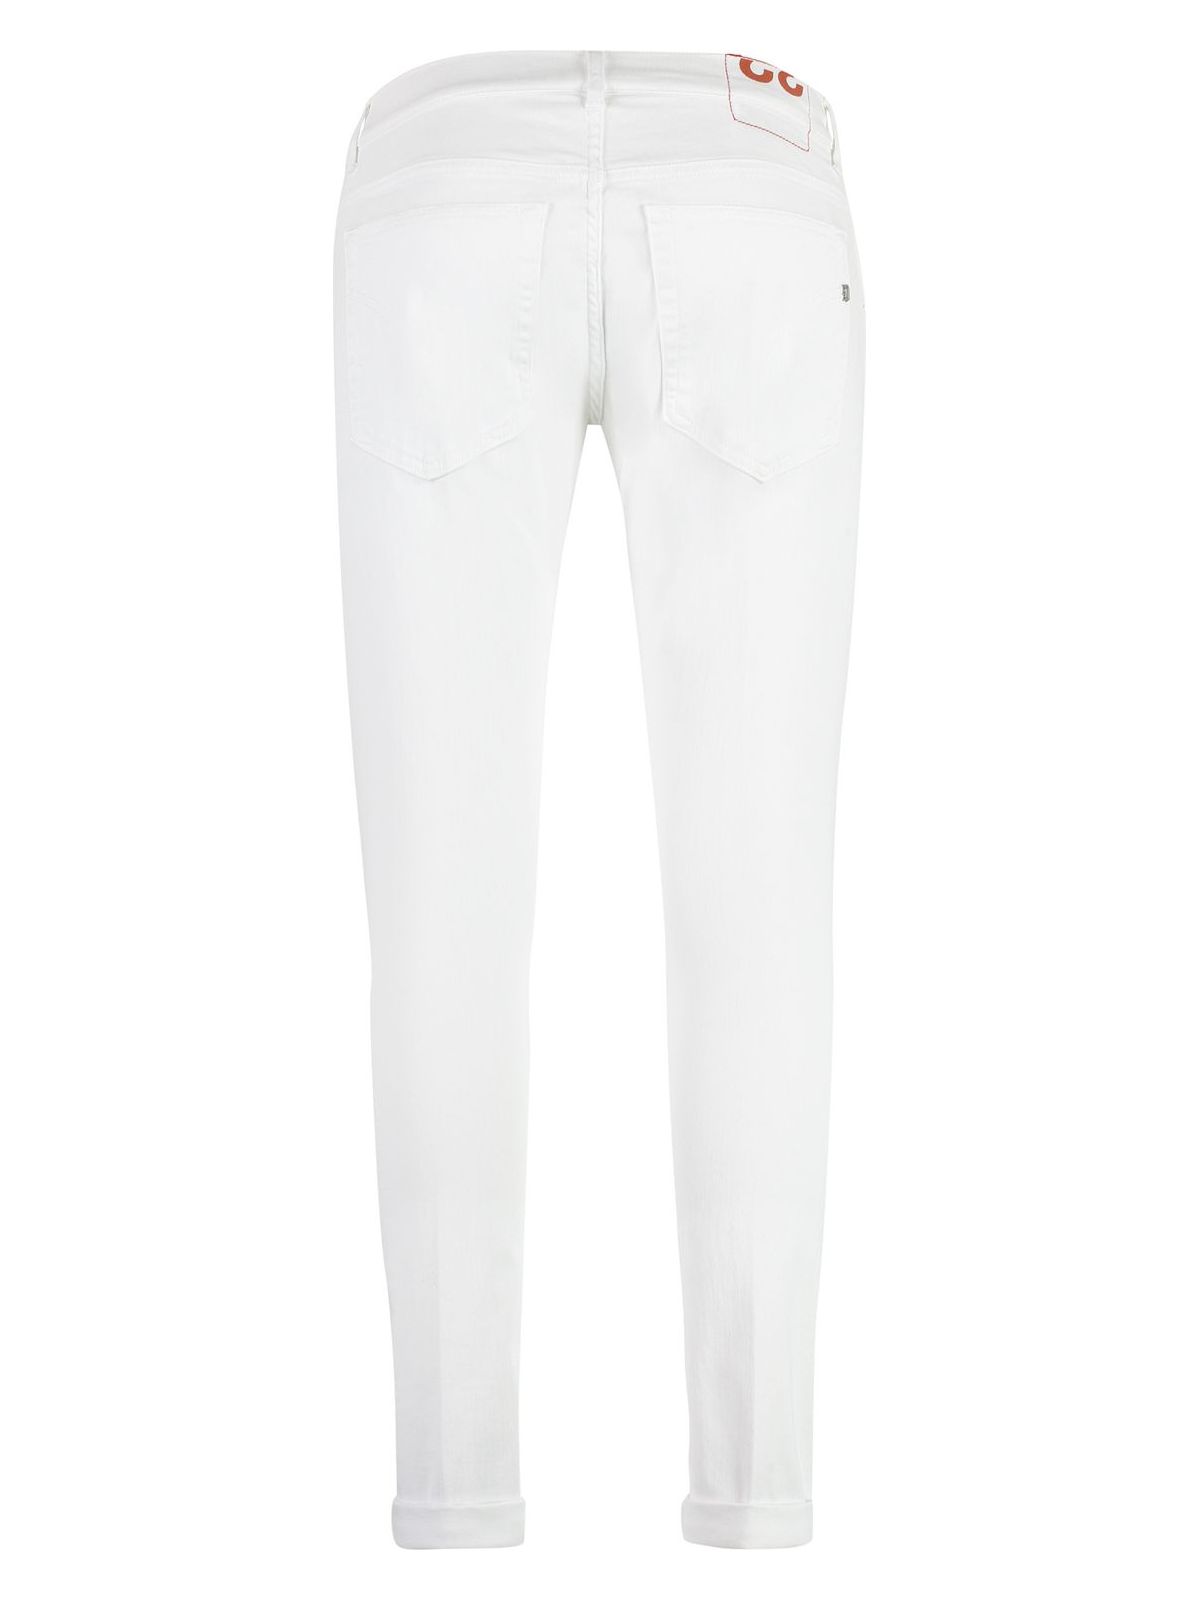 000 DONDUP RITCHIE SKINNY JEANS